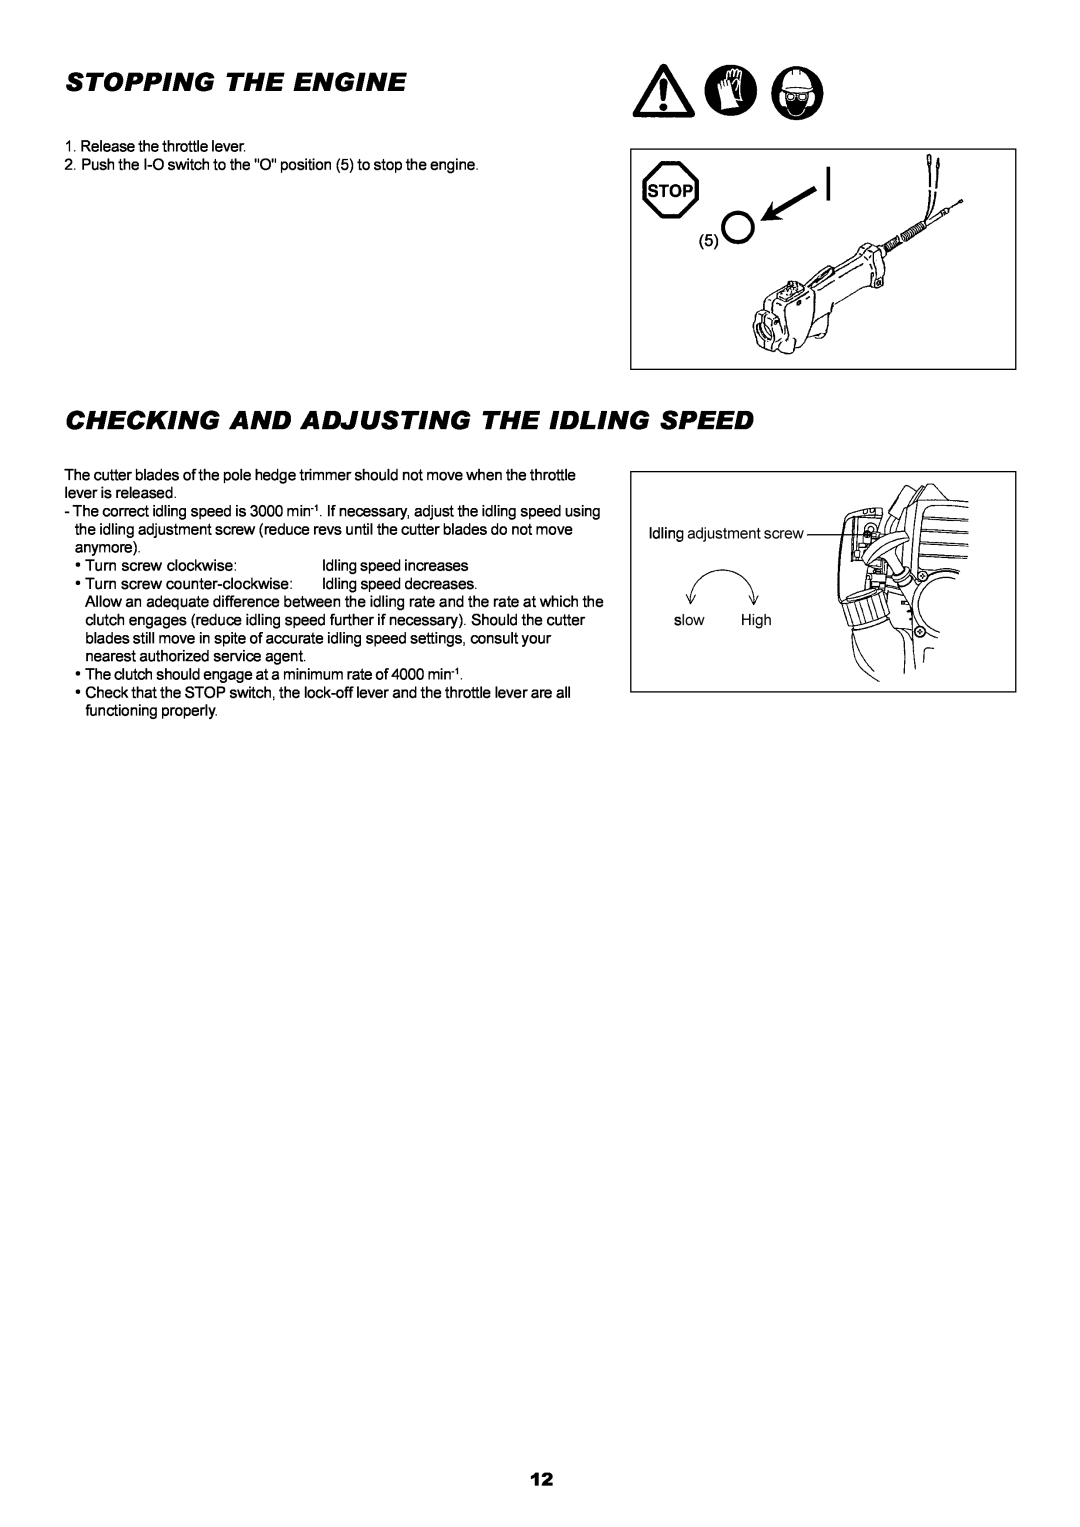 Dolmar MH-2556 instruction manual Stopping The Engine, Checking And Adjusting The Idling Speed 